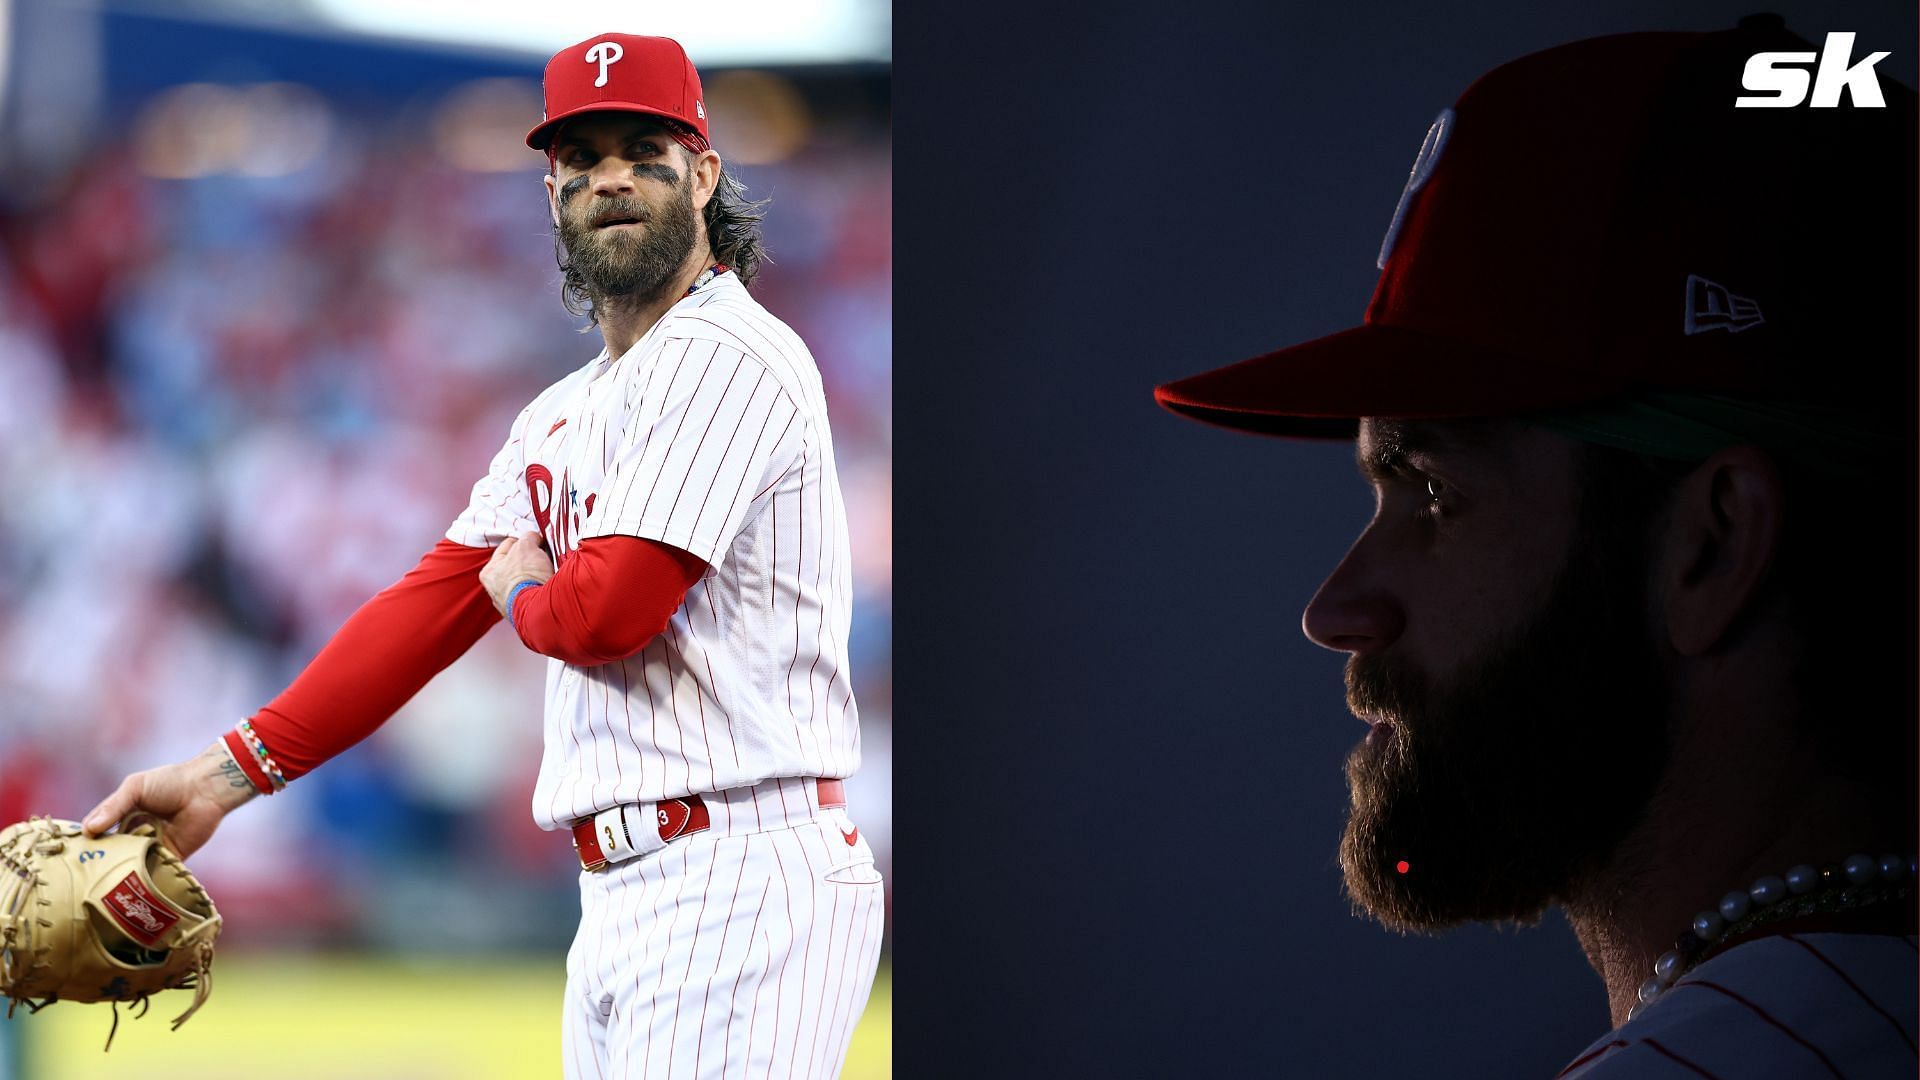 Bryce Harper has attracted more than his fair share of criticism over the seasons